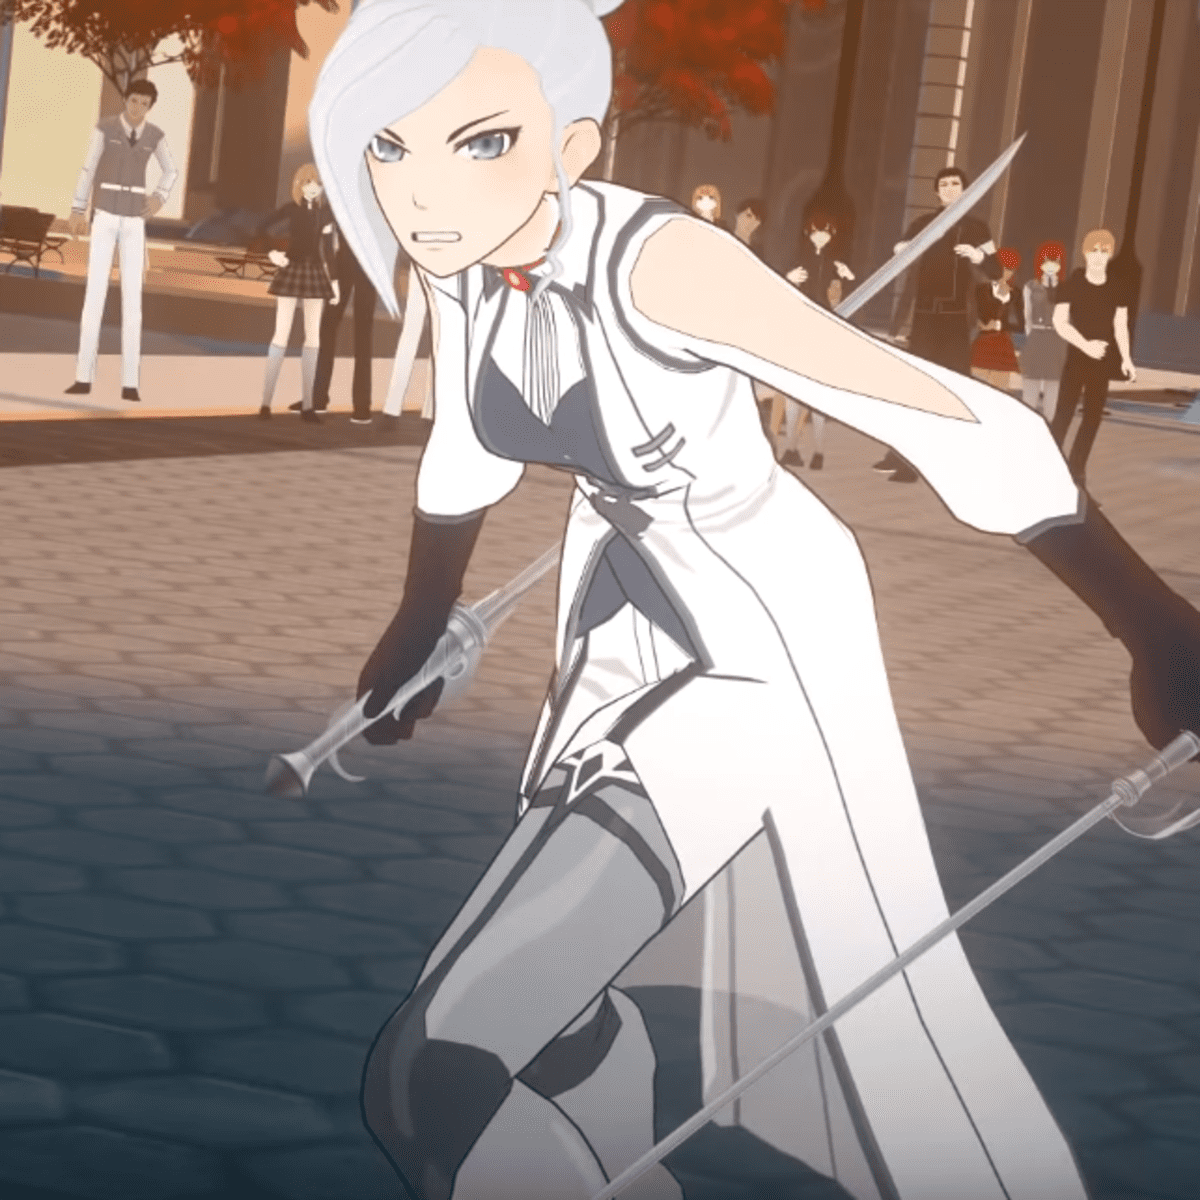 A comprehensive review of RWBY – The CavChron